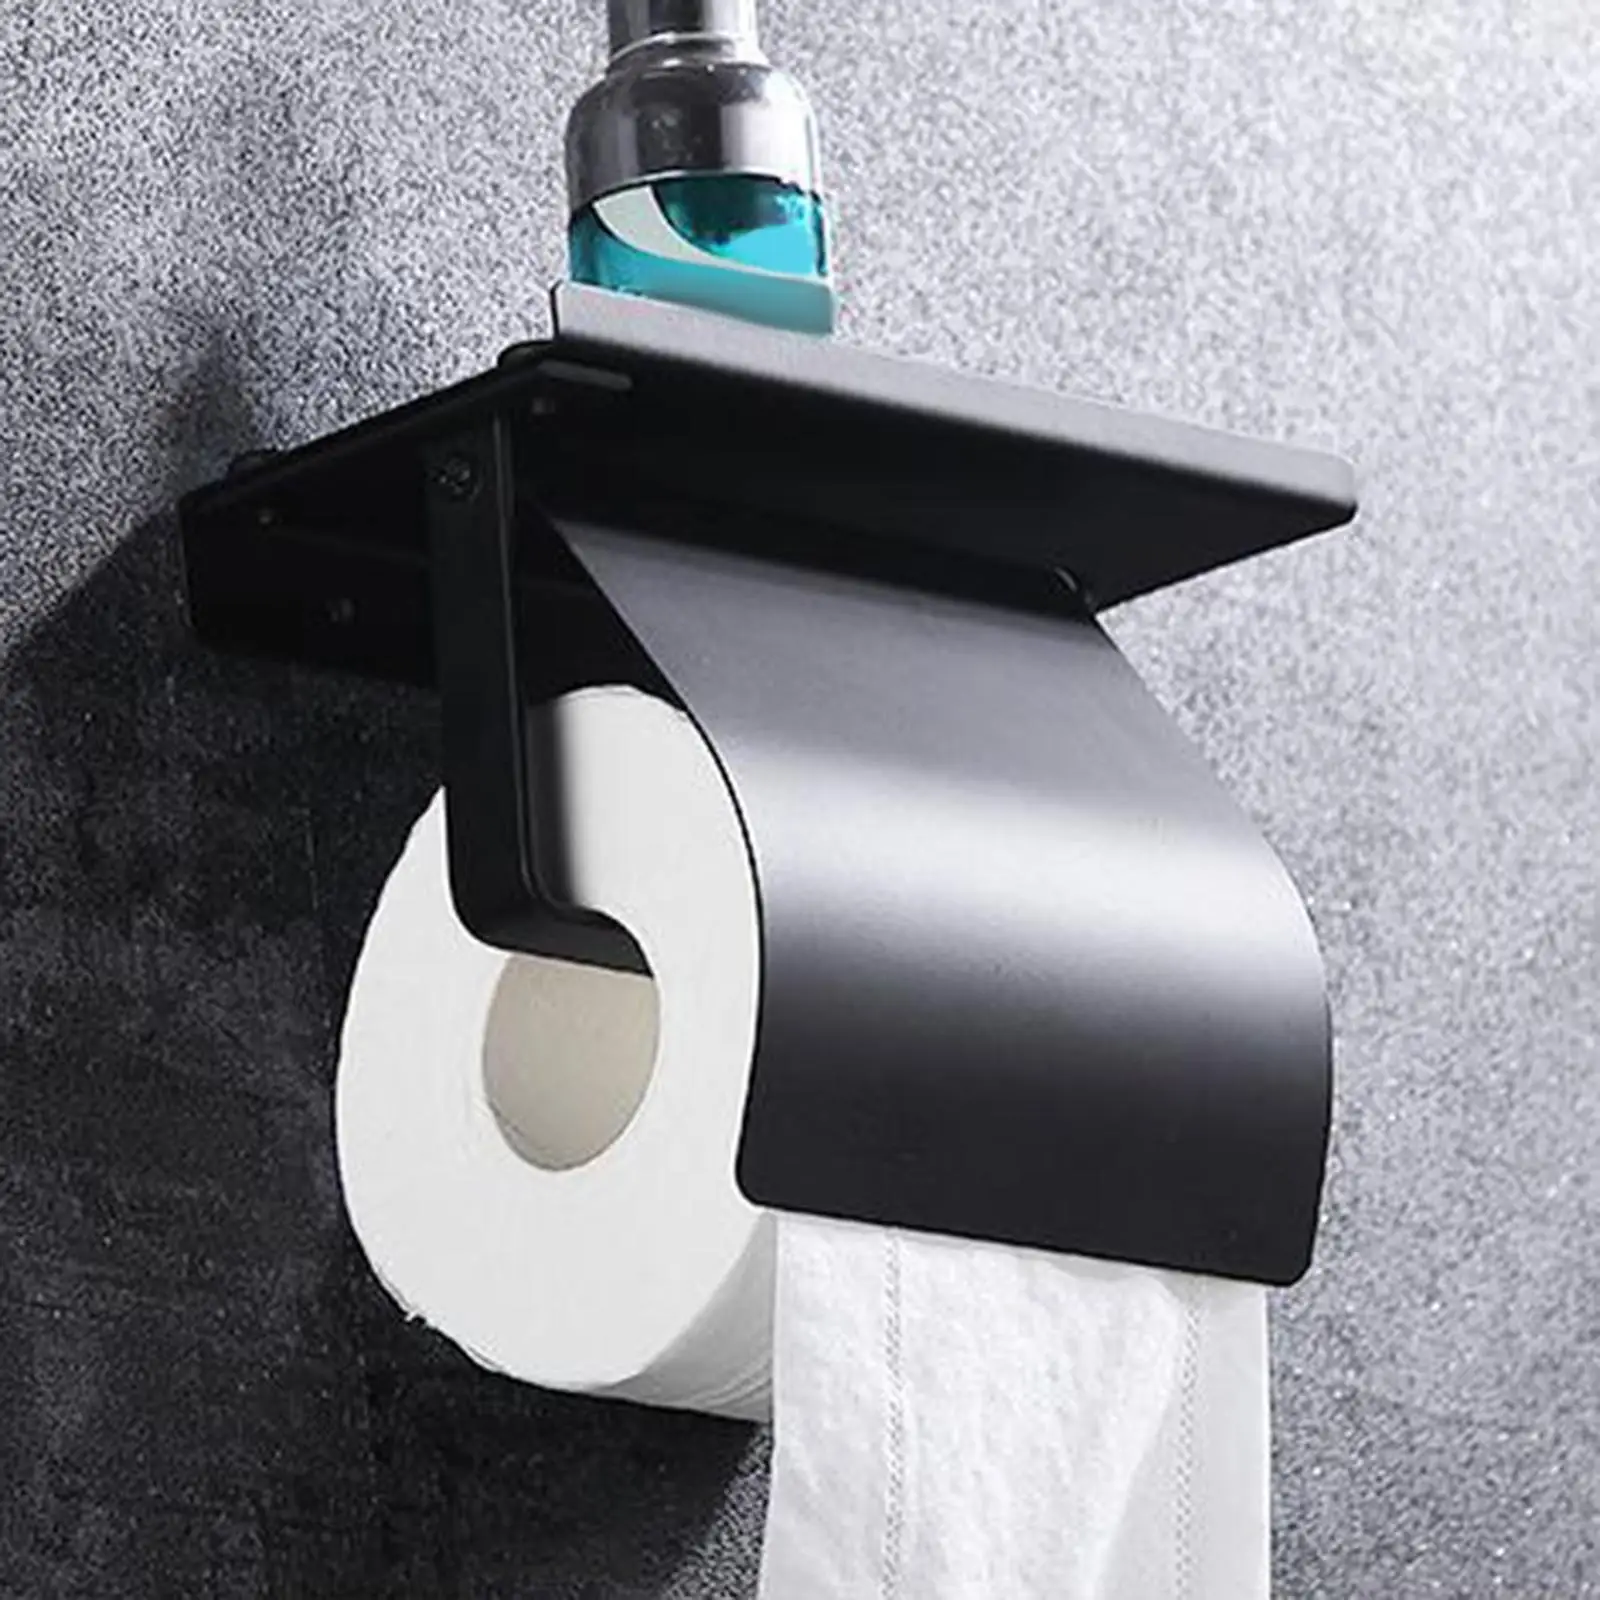 Wall Mount Toilet Paper Holder Bathroom Accessories Tissue Roll Storage Rack Toilet Roll Holders with Cover for Washroom Toliet